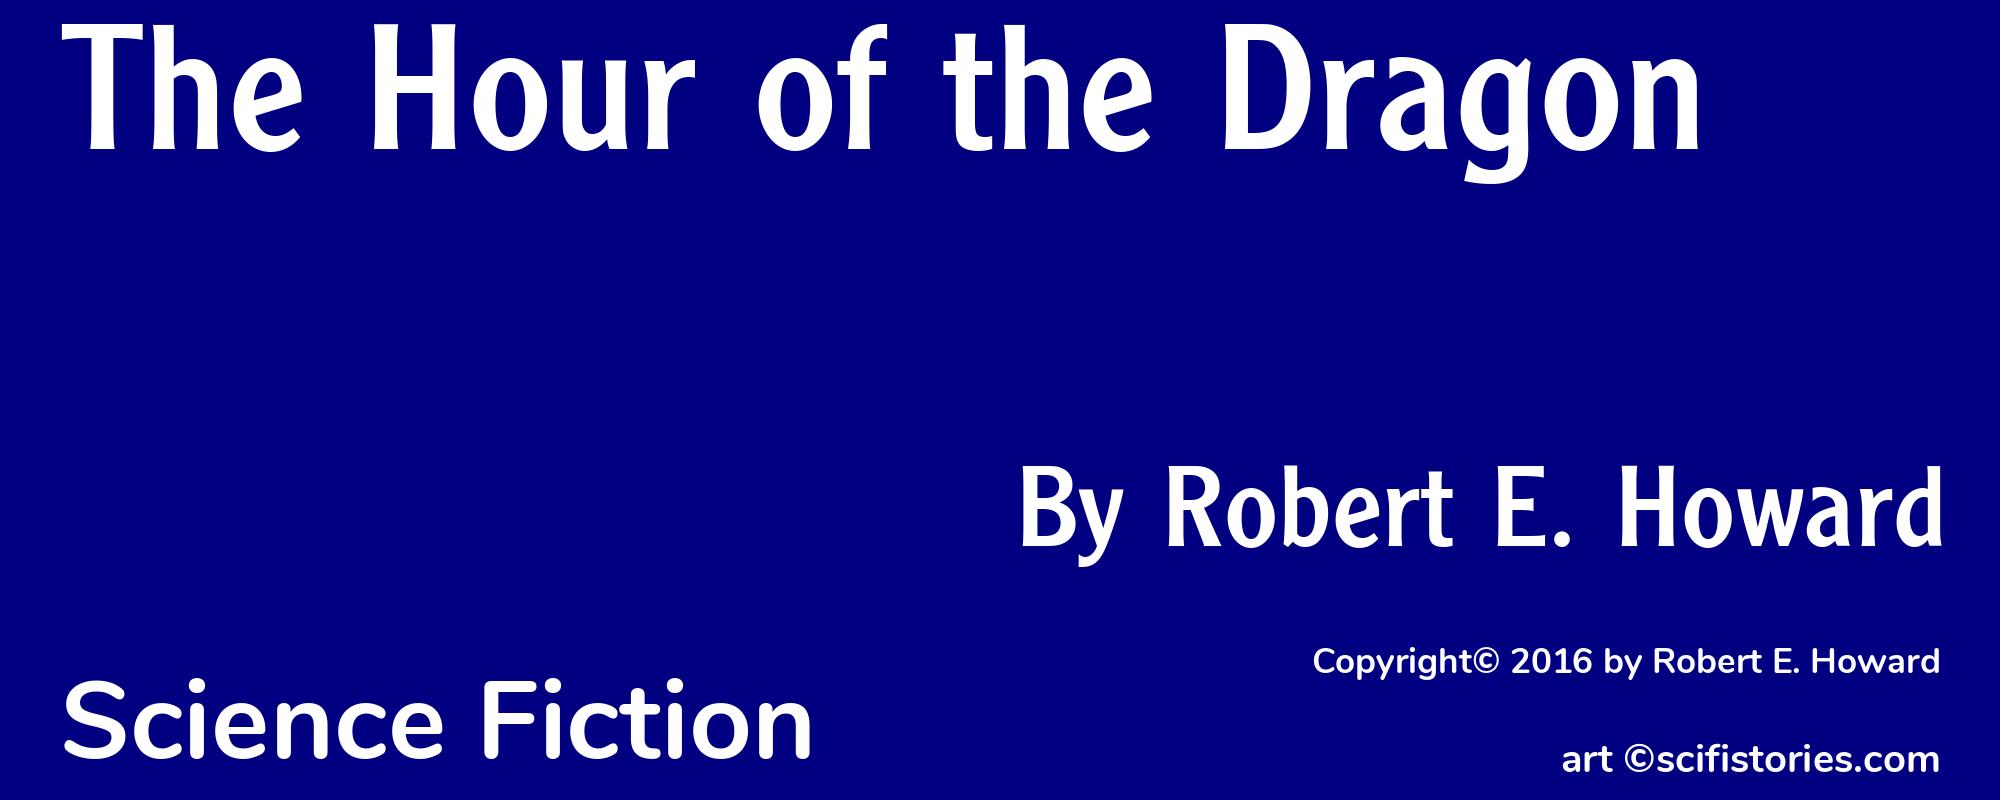 The Hour of the Dragon - Cover